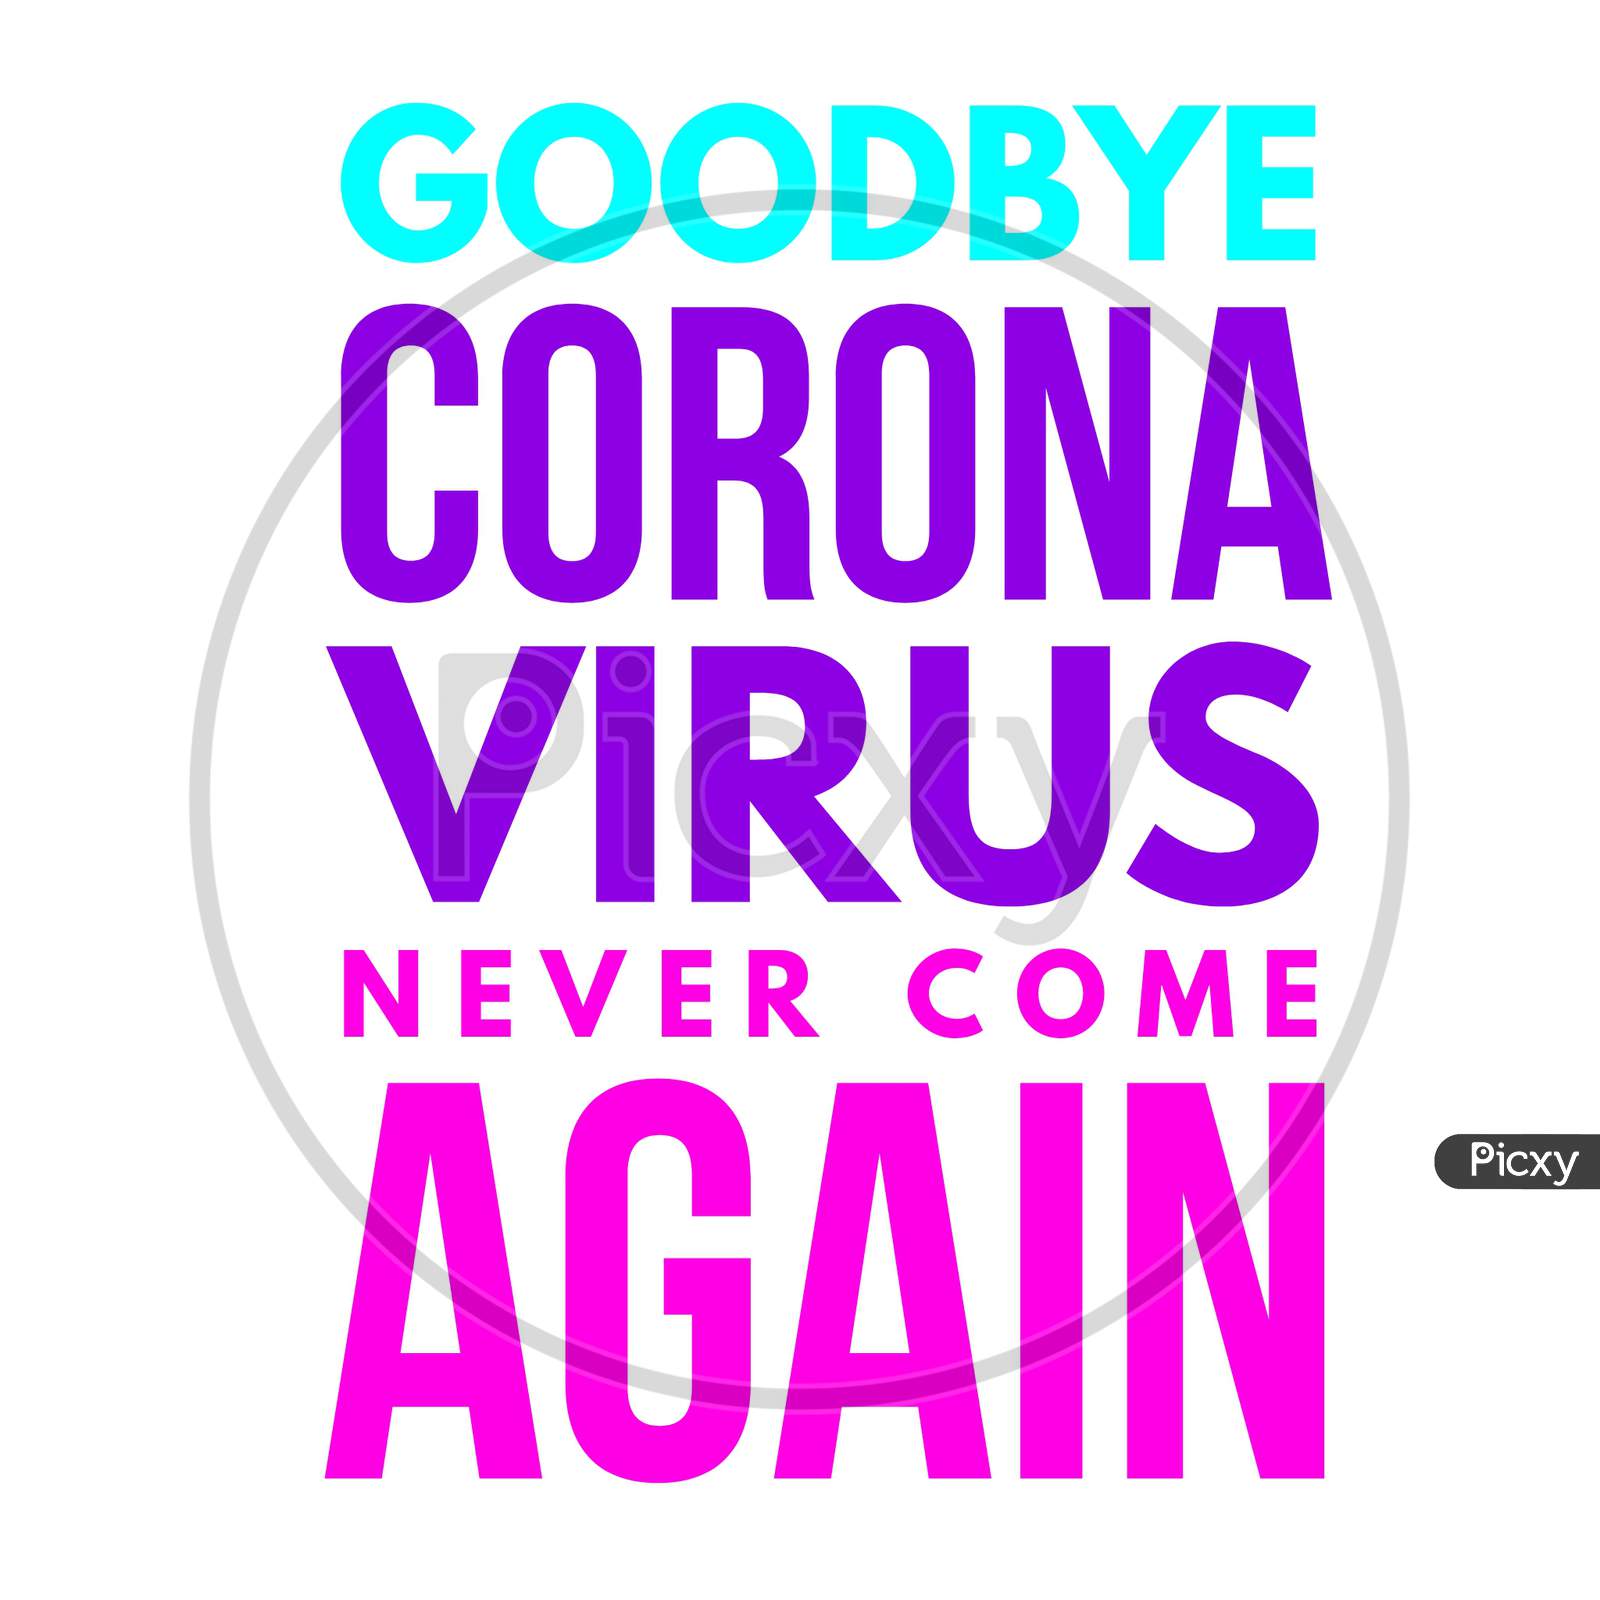 Image With A Colorful Text "Goodbye Corona Virus Never Come Again"